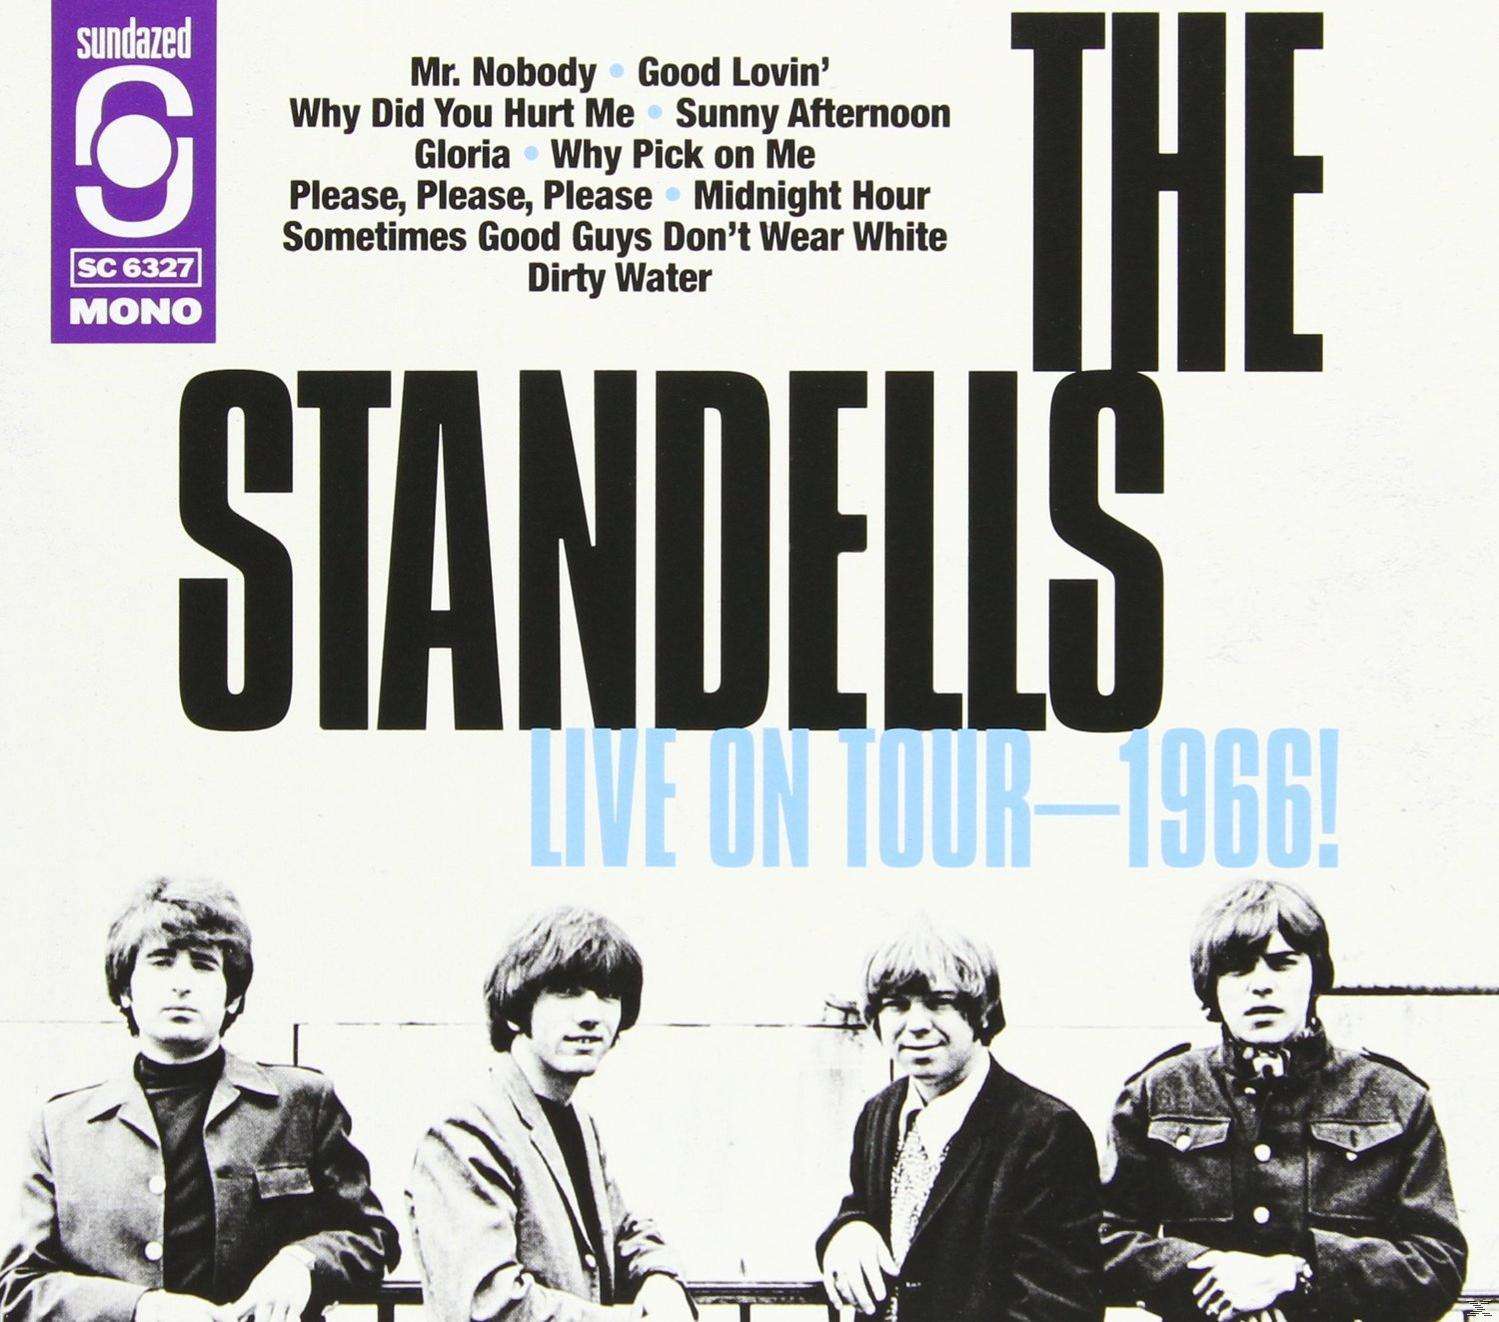 Live Tour-1966! Standells - The (CD) On -